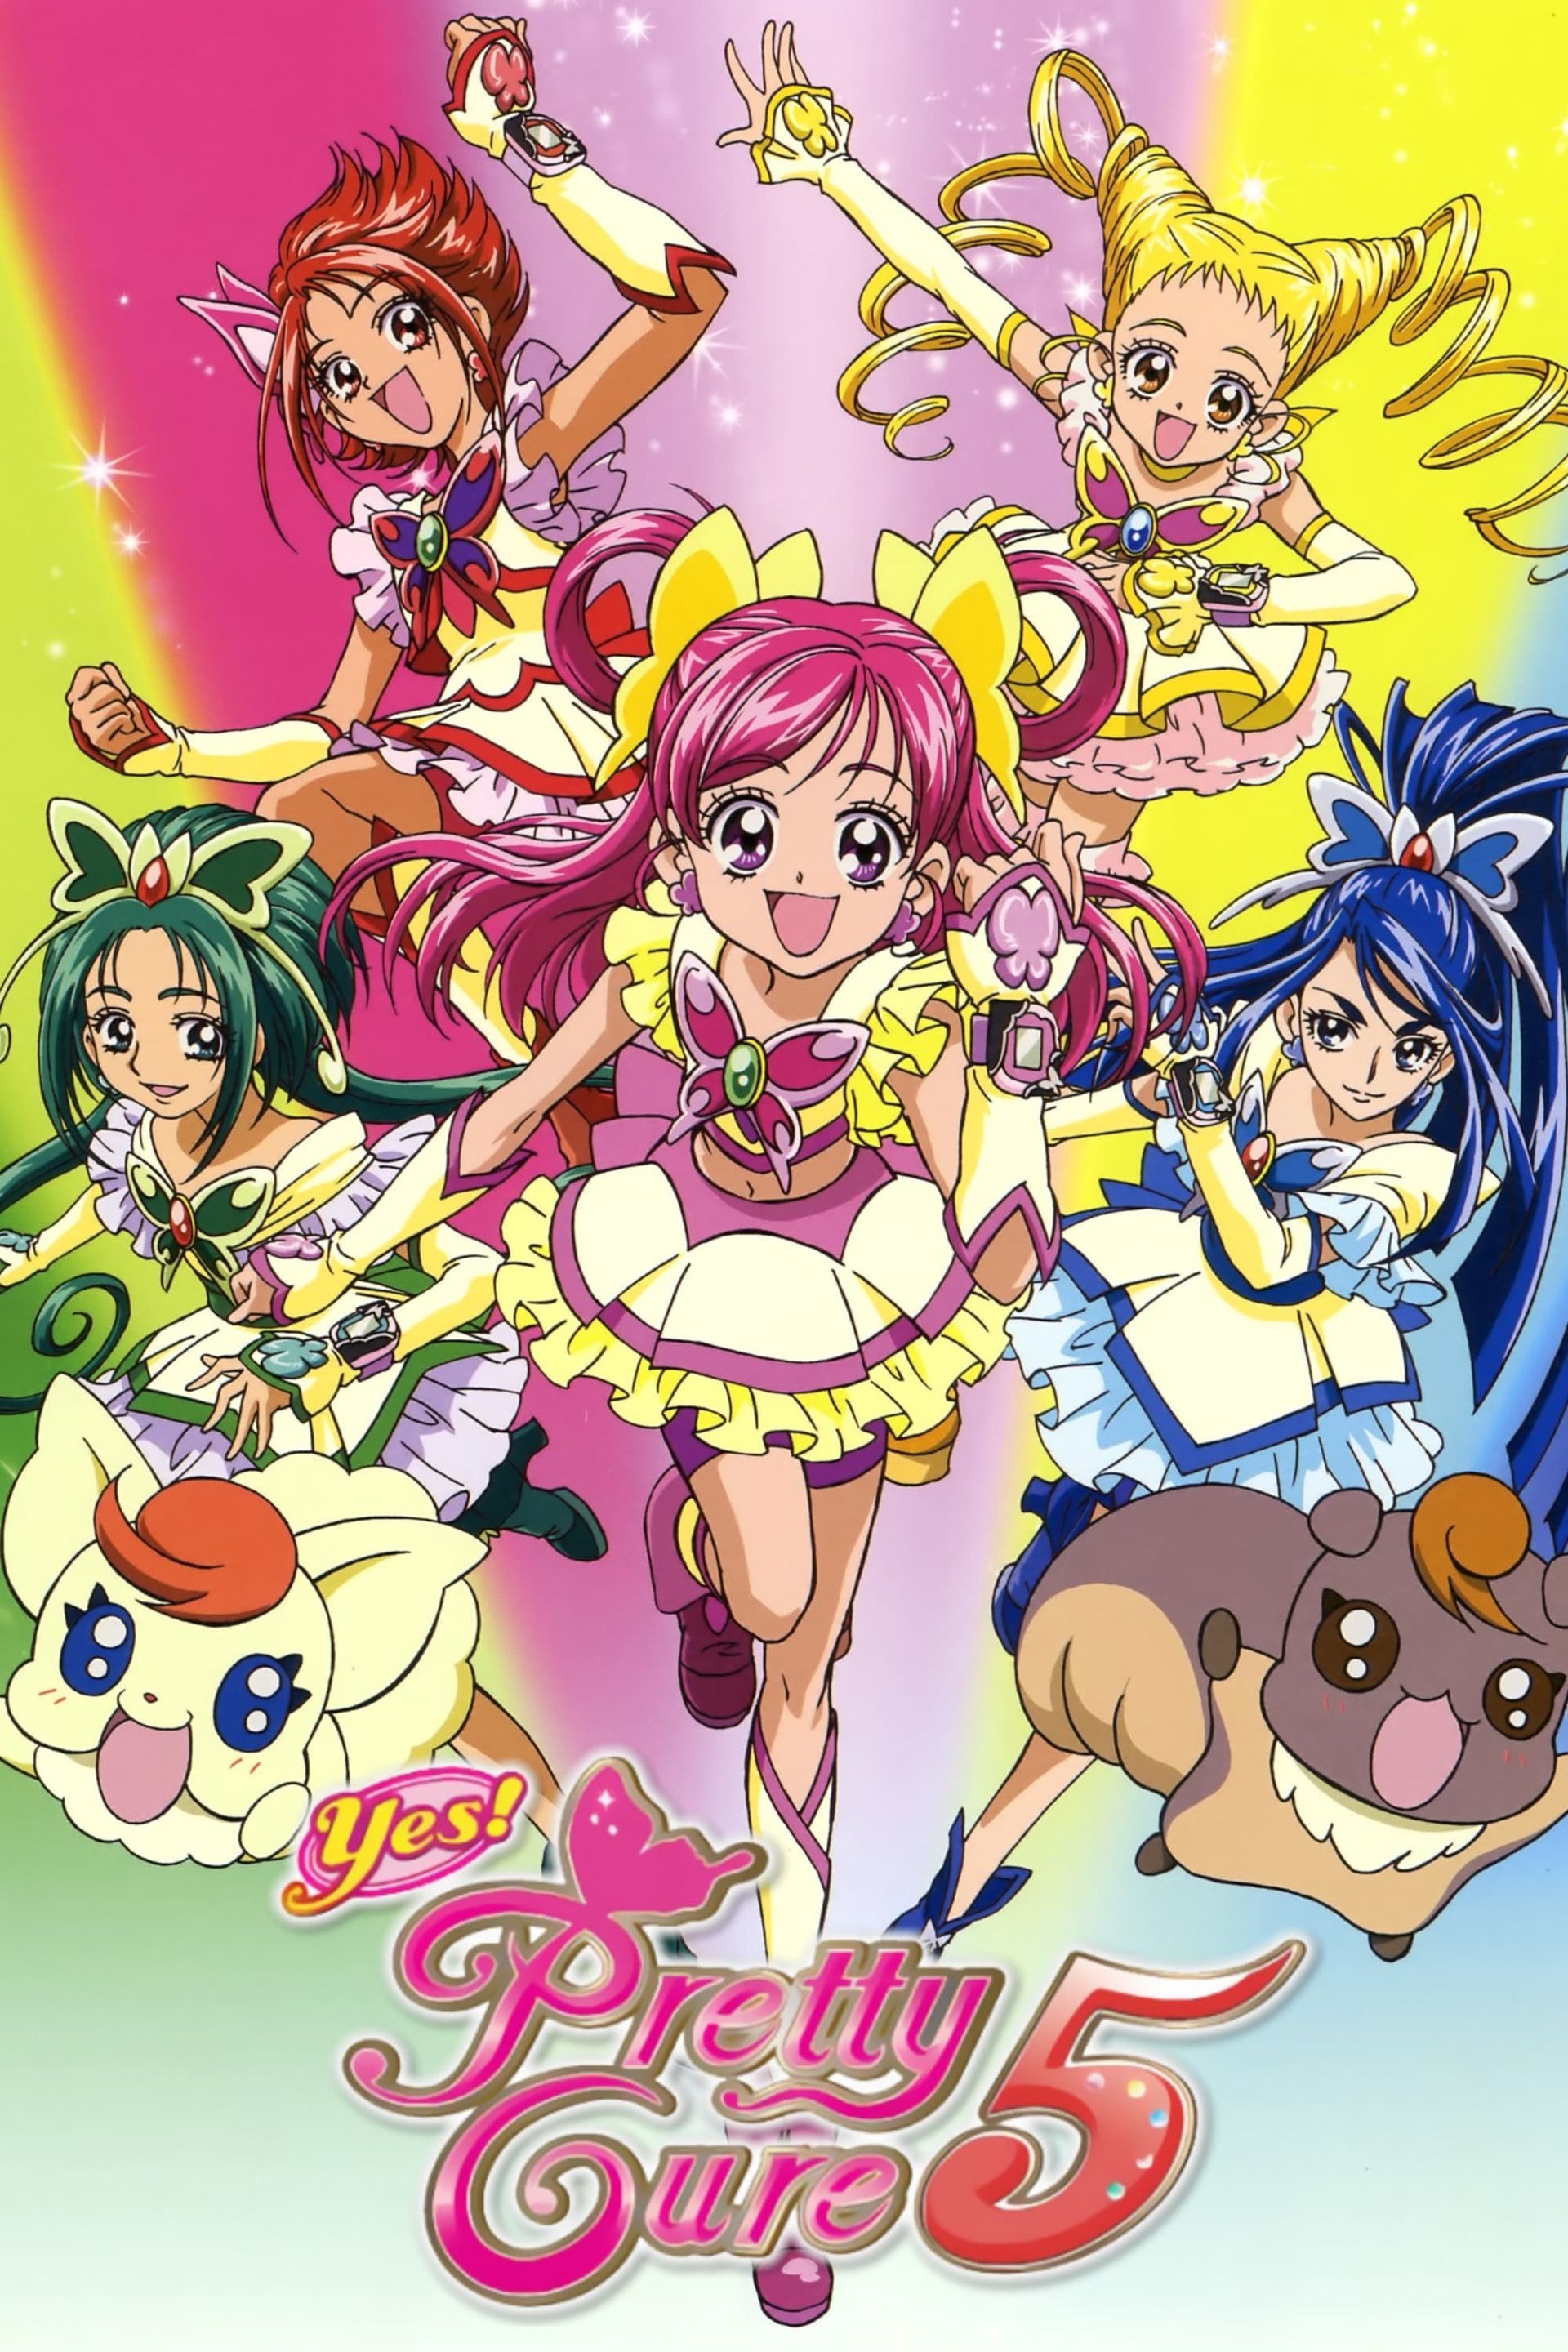 Yes PreCure 5 GoGo: Almost Killed It